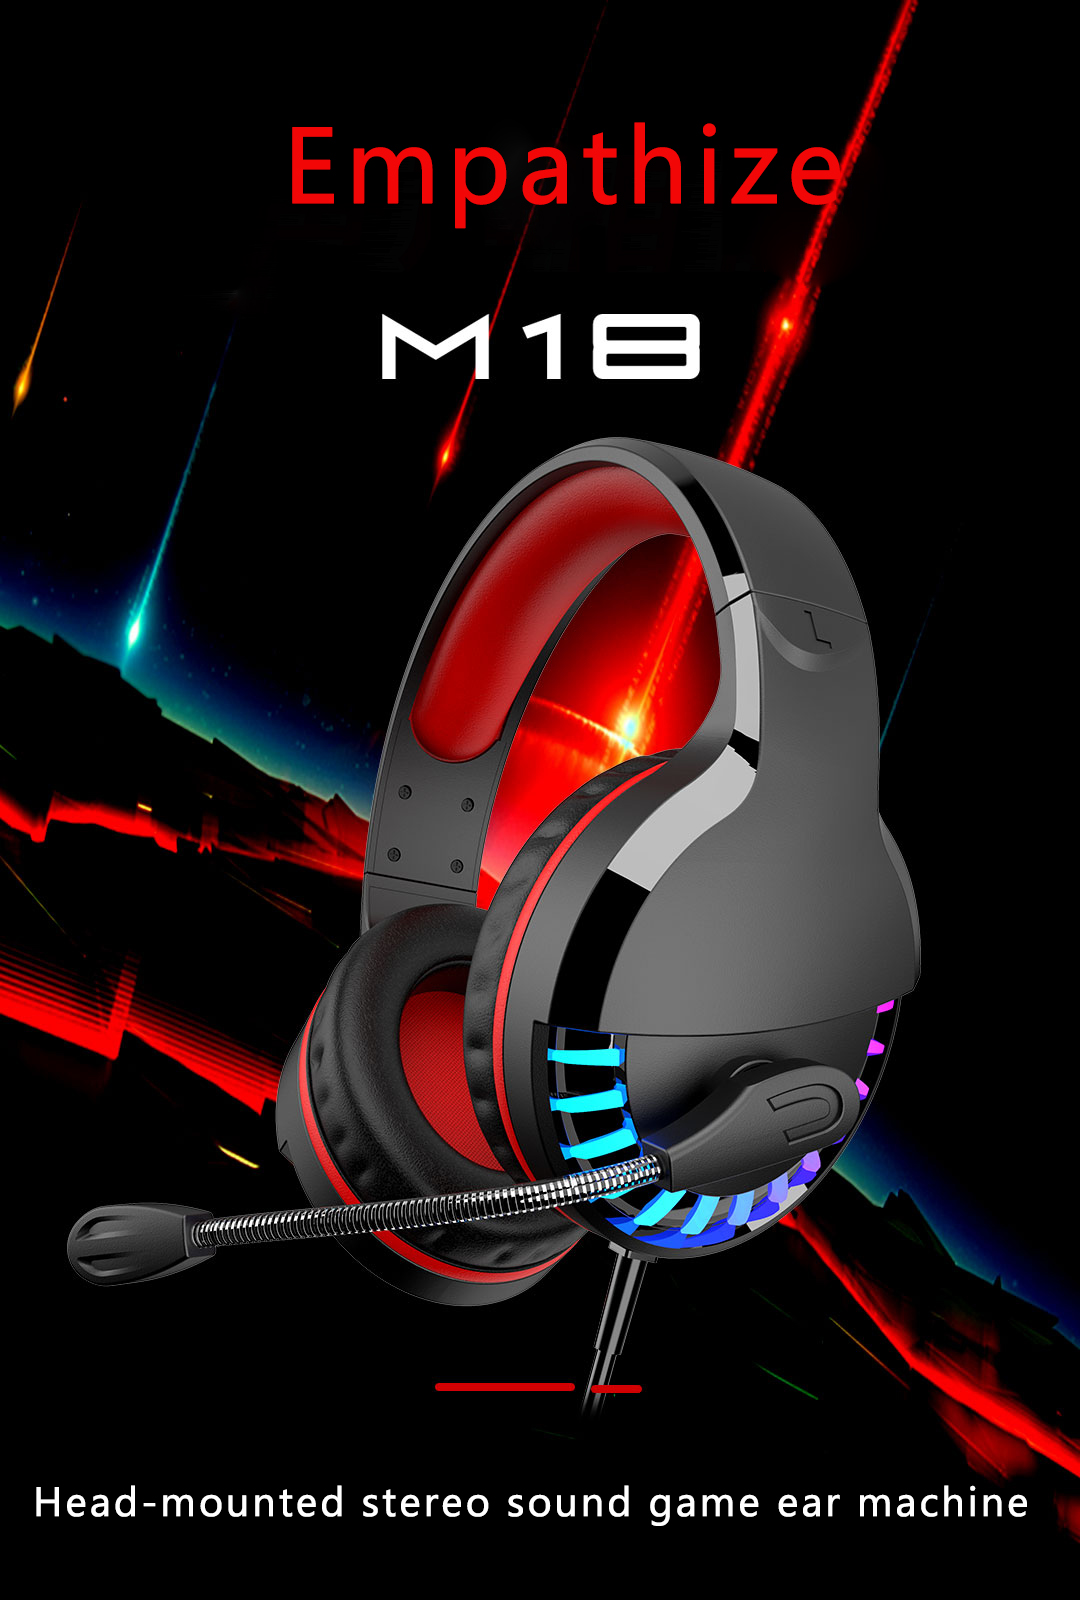 M18-Gaming-Headphones-Luminous-Colorful-Headset-35mm-Stereo-Earphone-with-Microphone-For-XBox-PS4-Ga-1722974-1